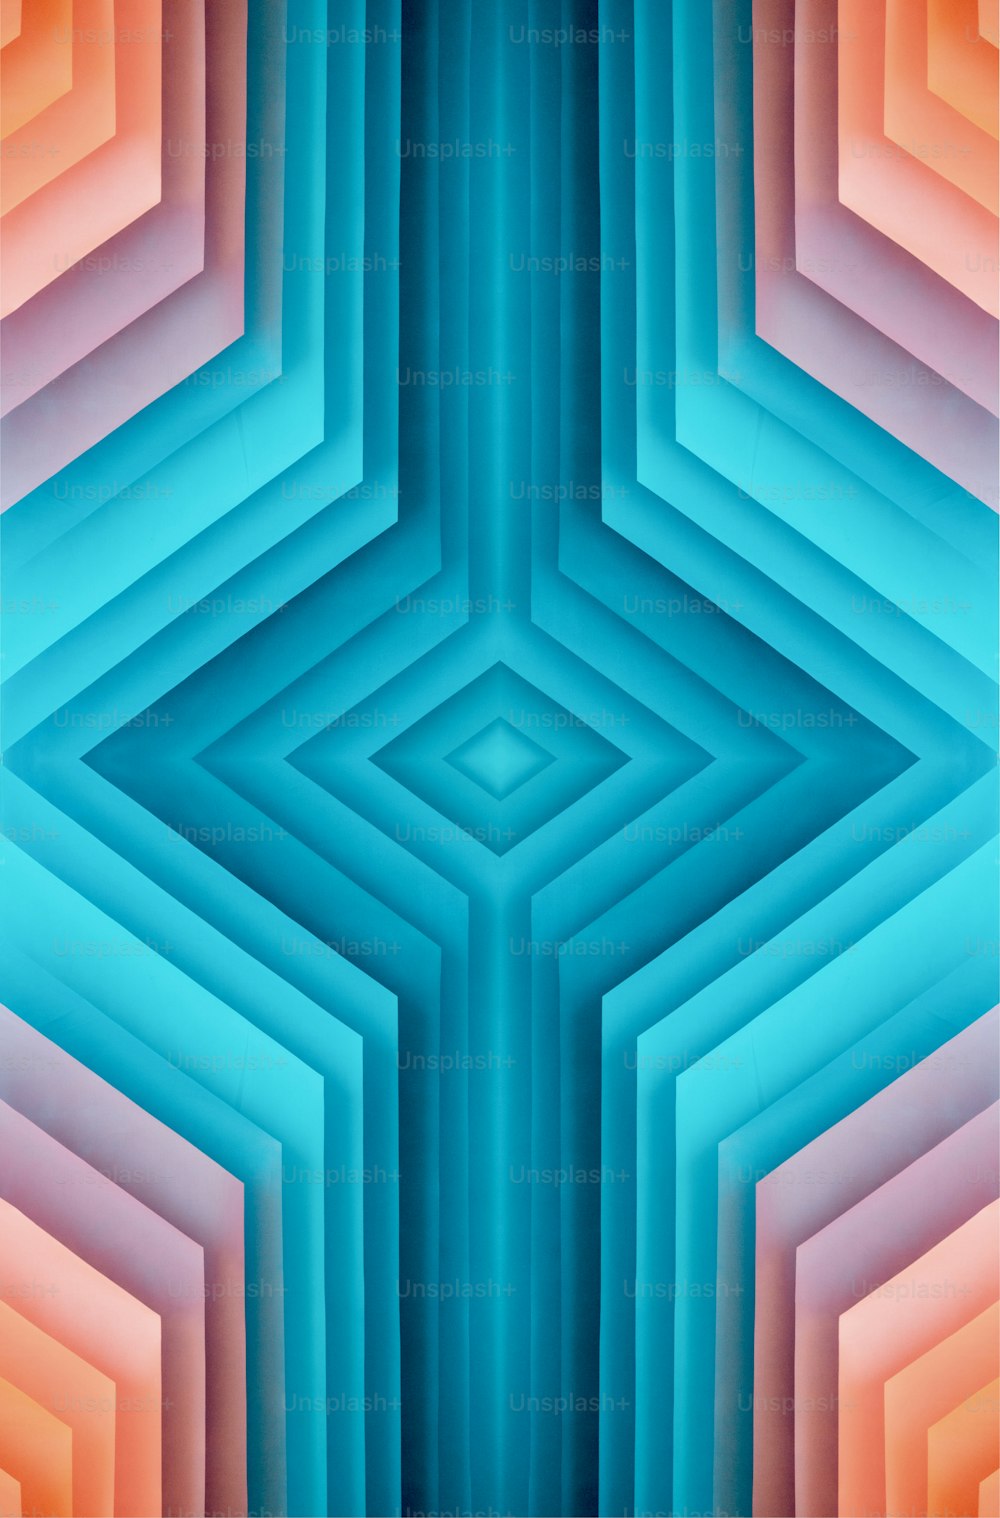 an abstract image of a blue, orange, and pink pattern